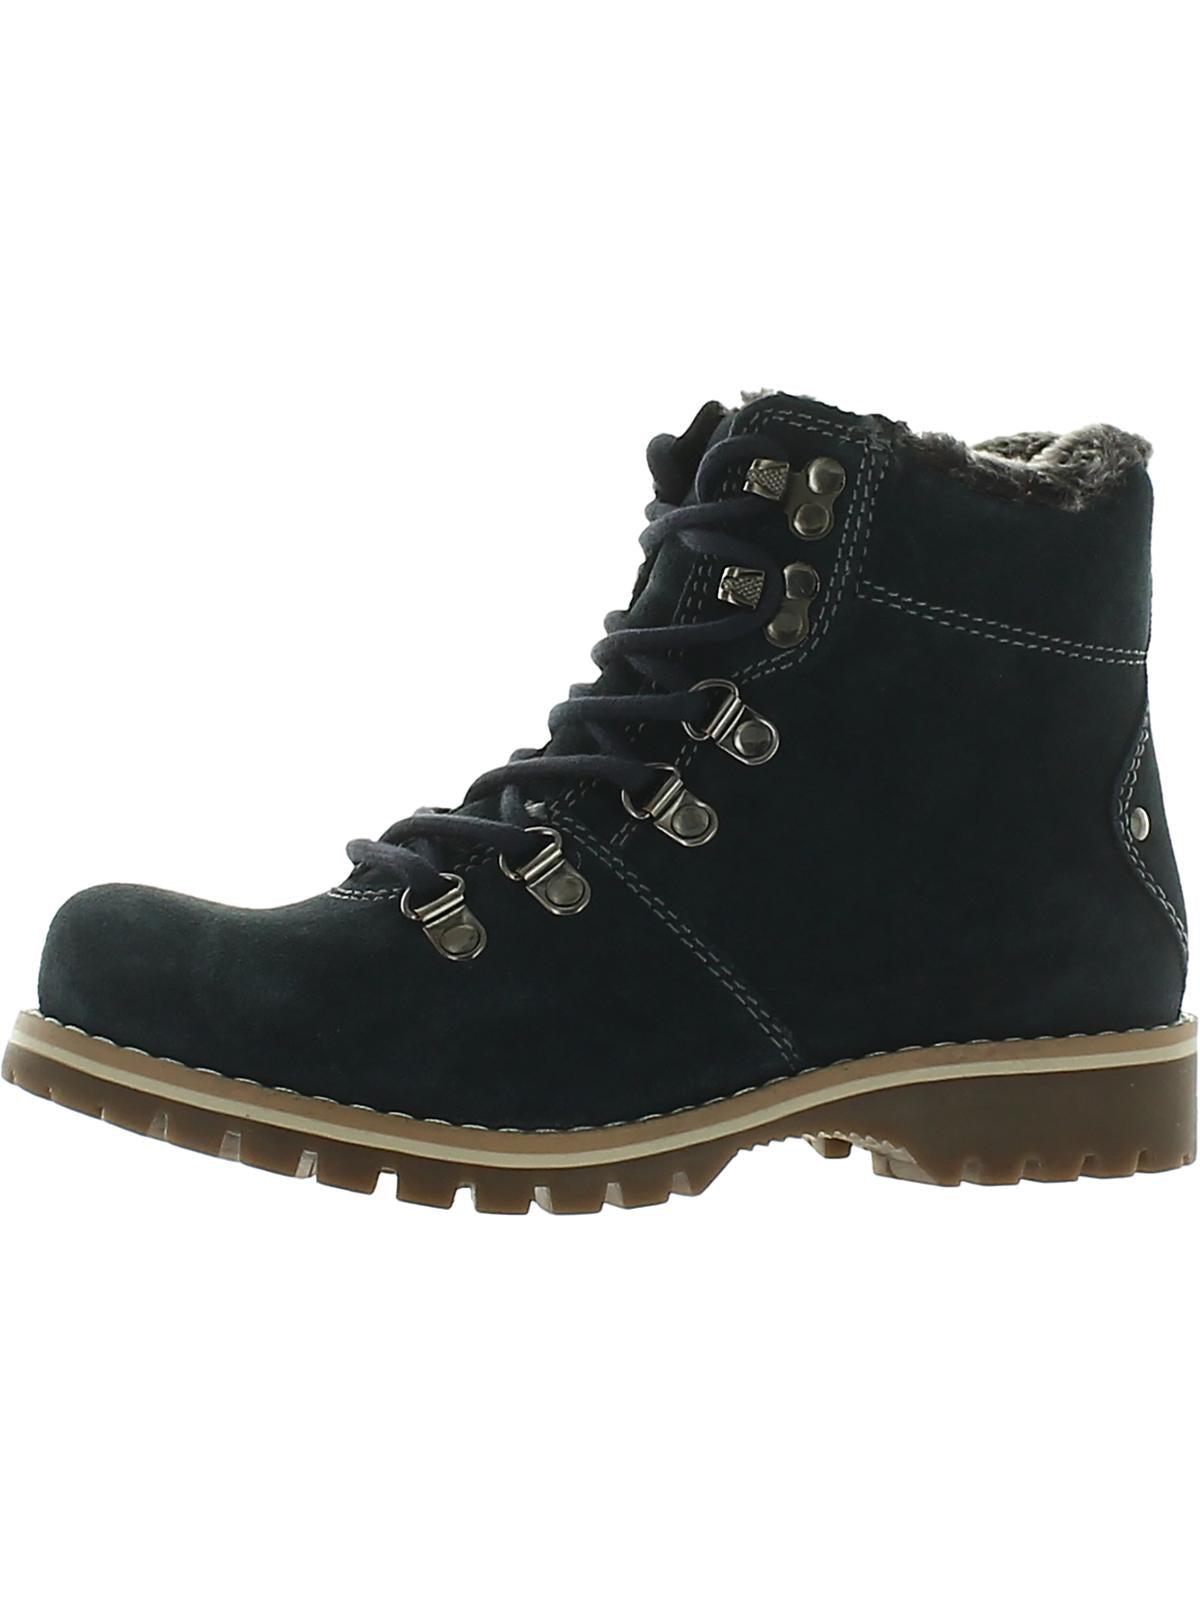 Earth Ranger Acadia Sude Round Toe Hiking Boots in Black | Lyst